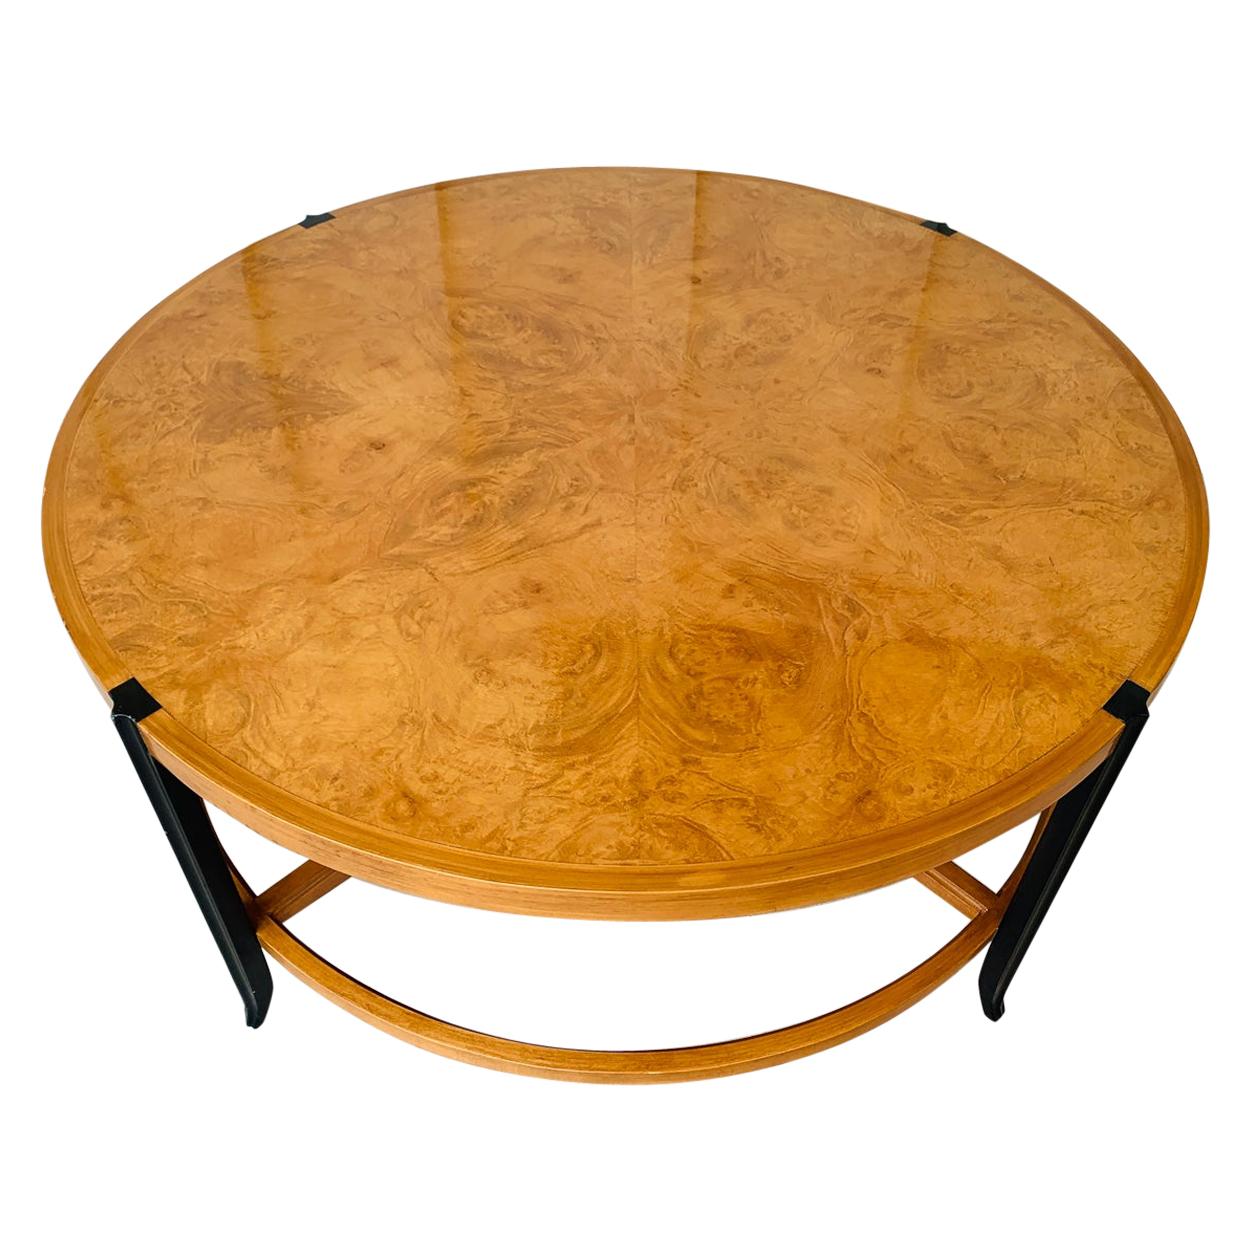 Stunning Coffee Table in Burl Wood and Lacquered Legs